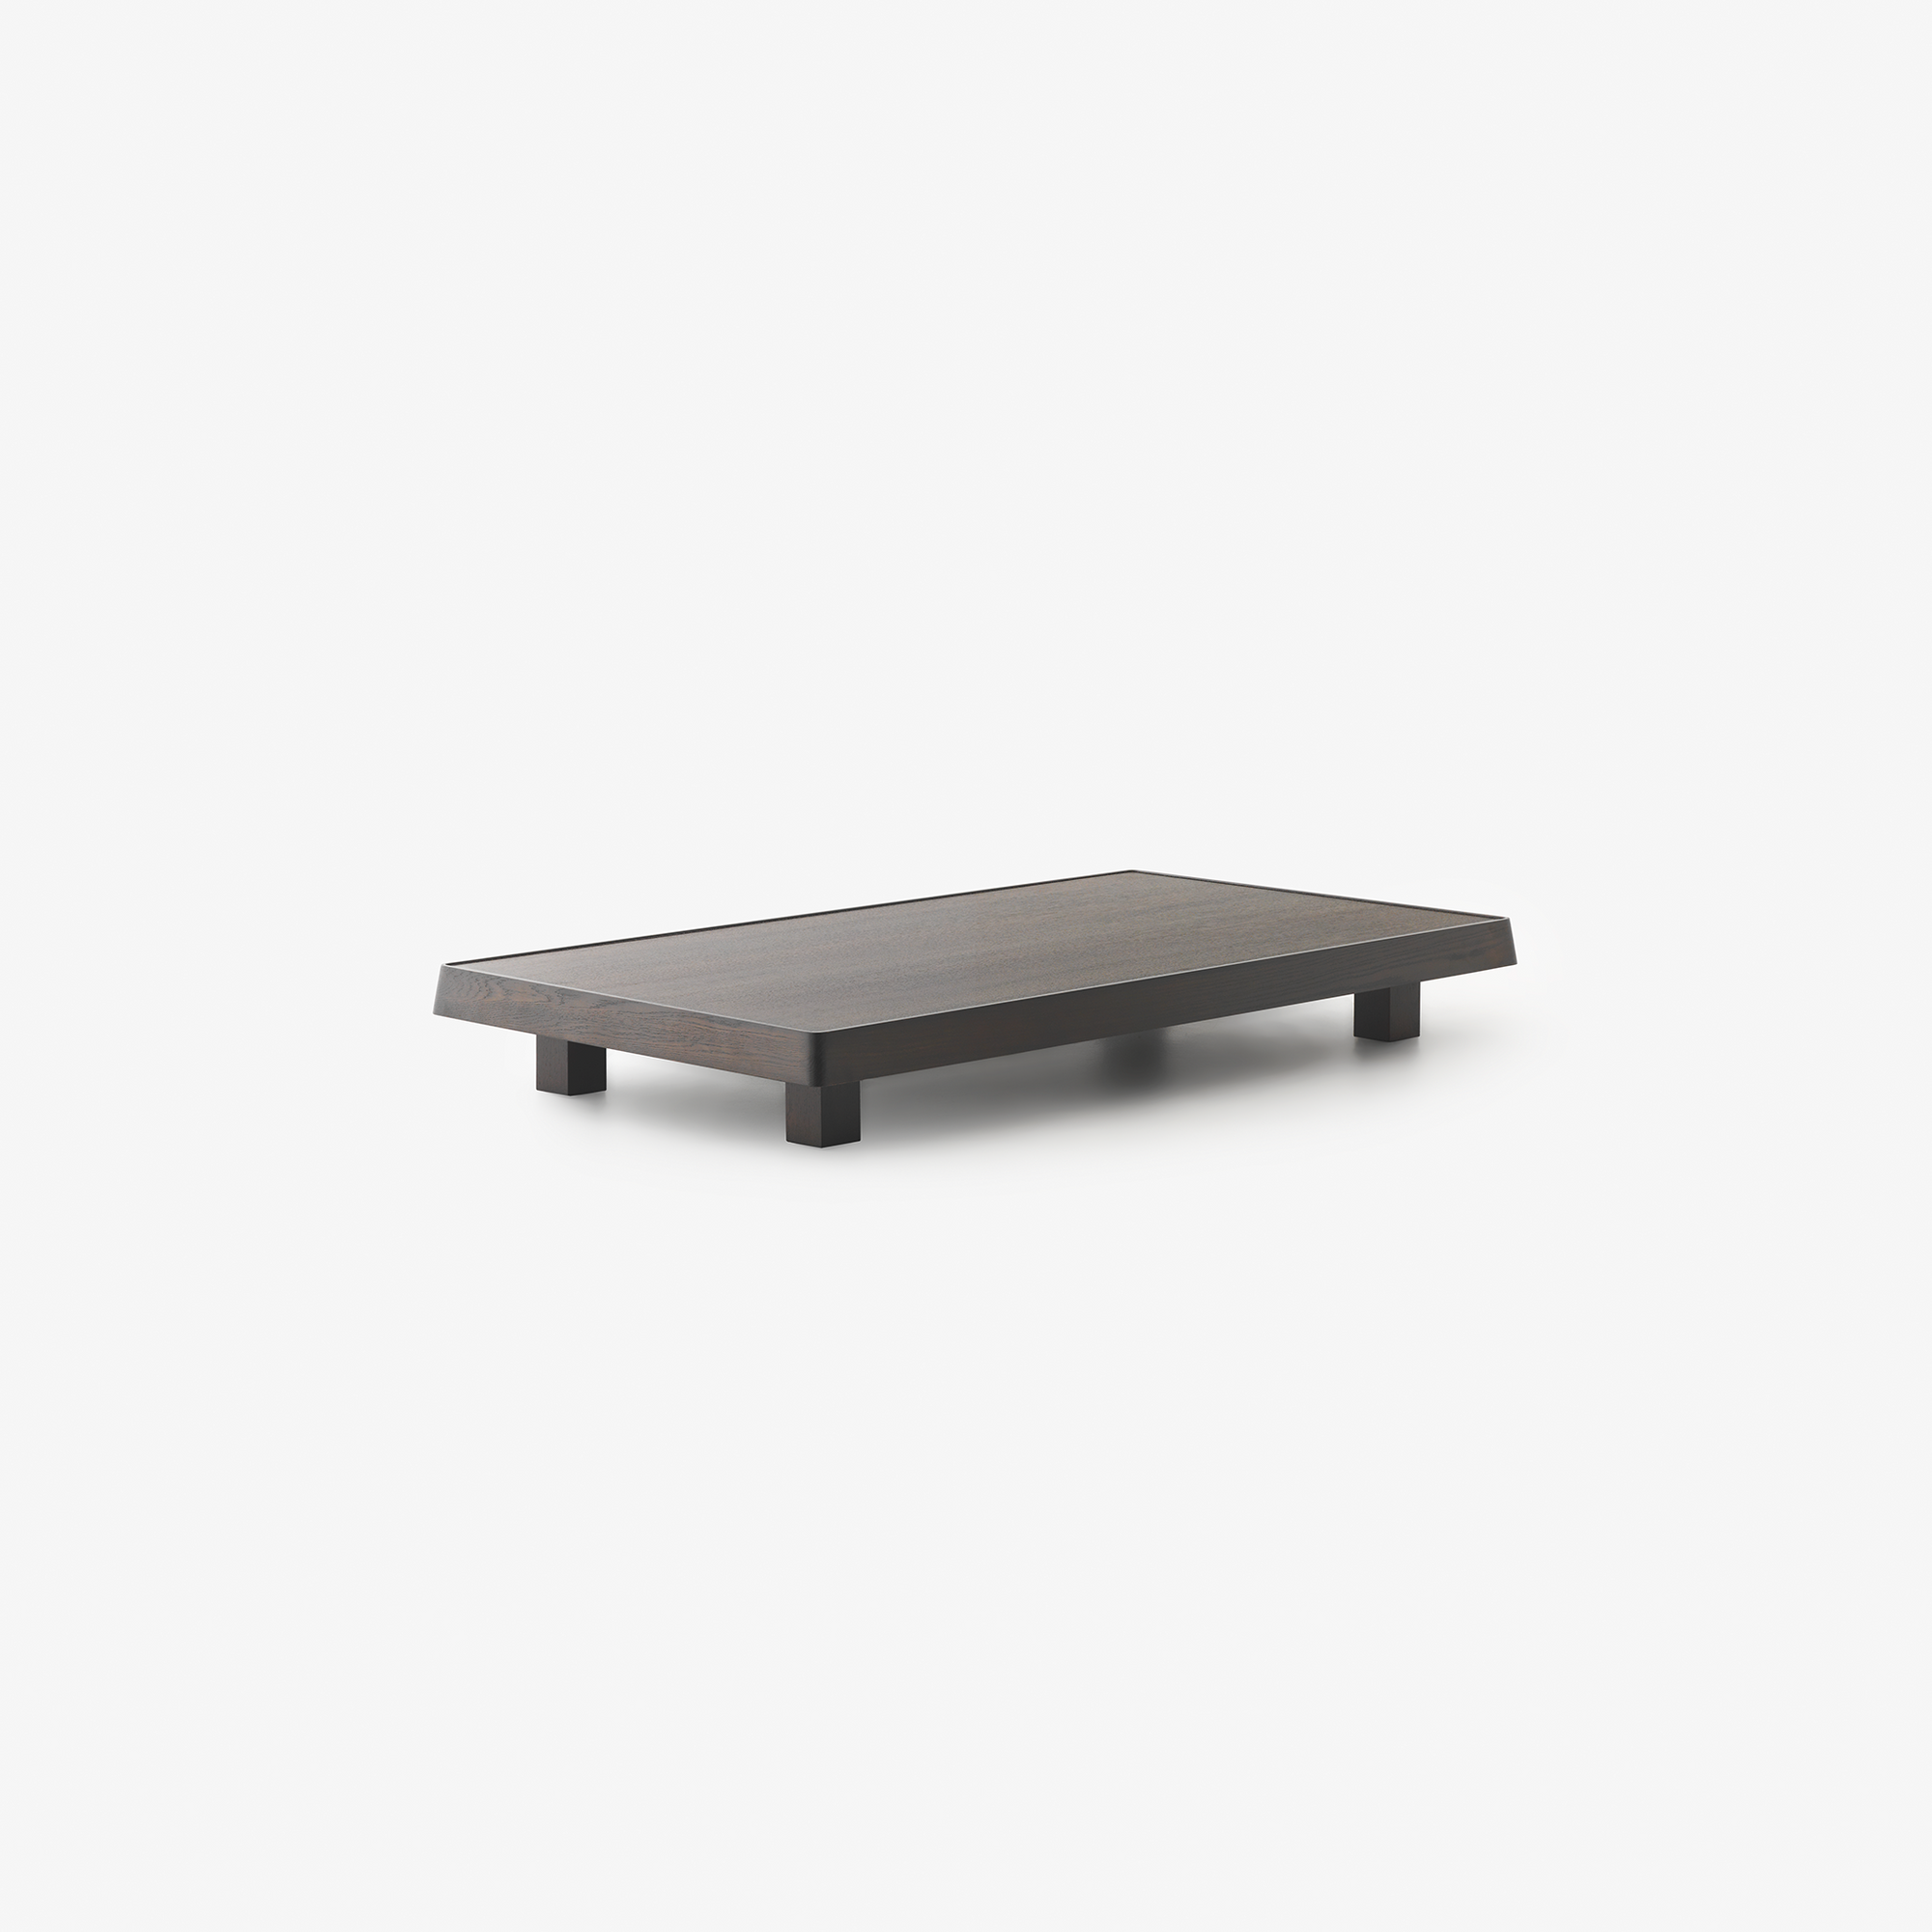 The Rover Coffee Table - Square